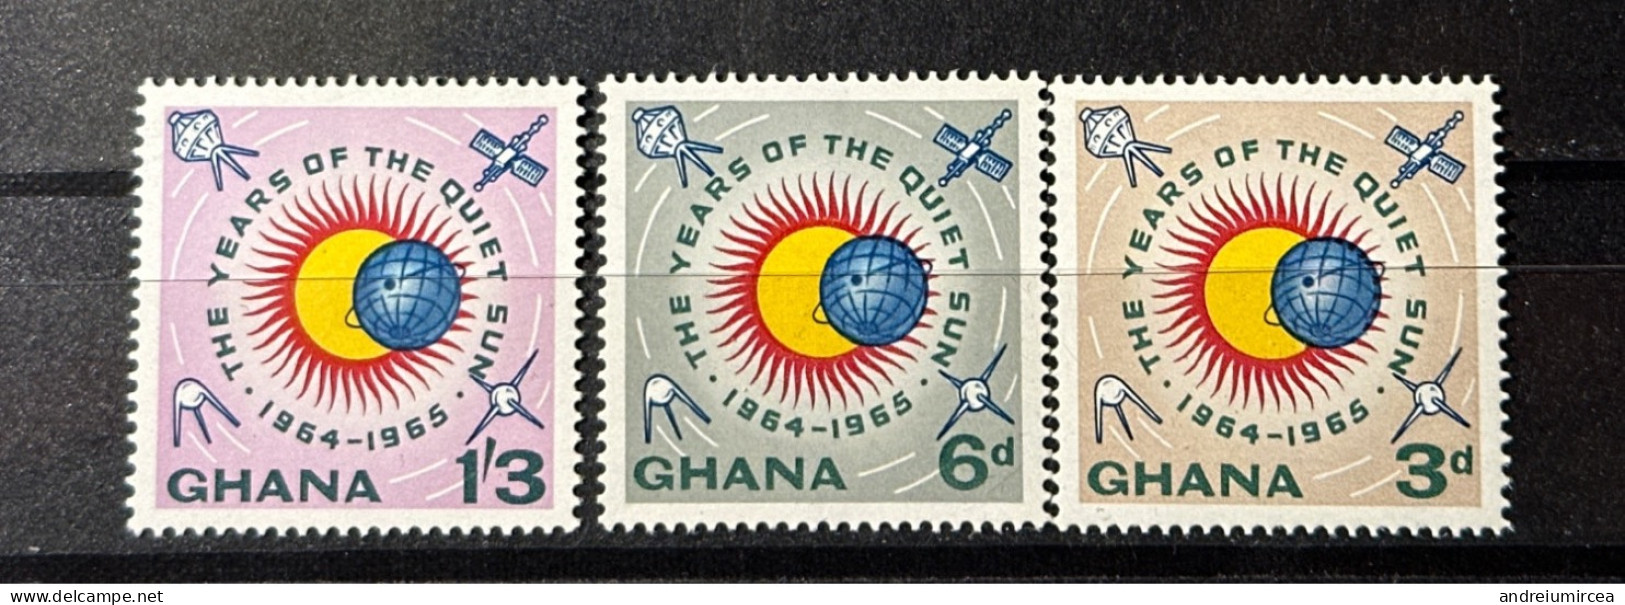 Ghana MNH  The Years Of The Quiet Sun 1964-1965 - Africa